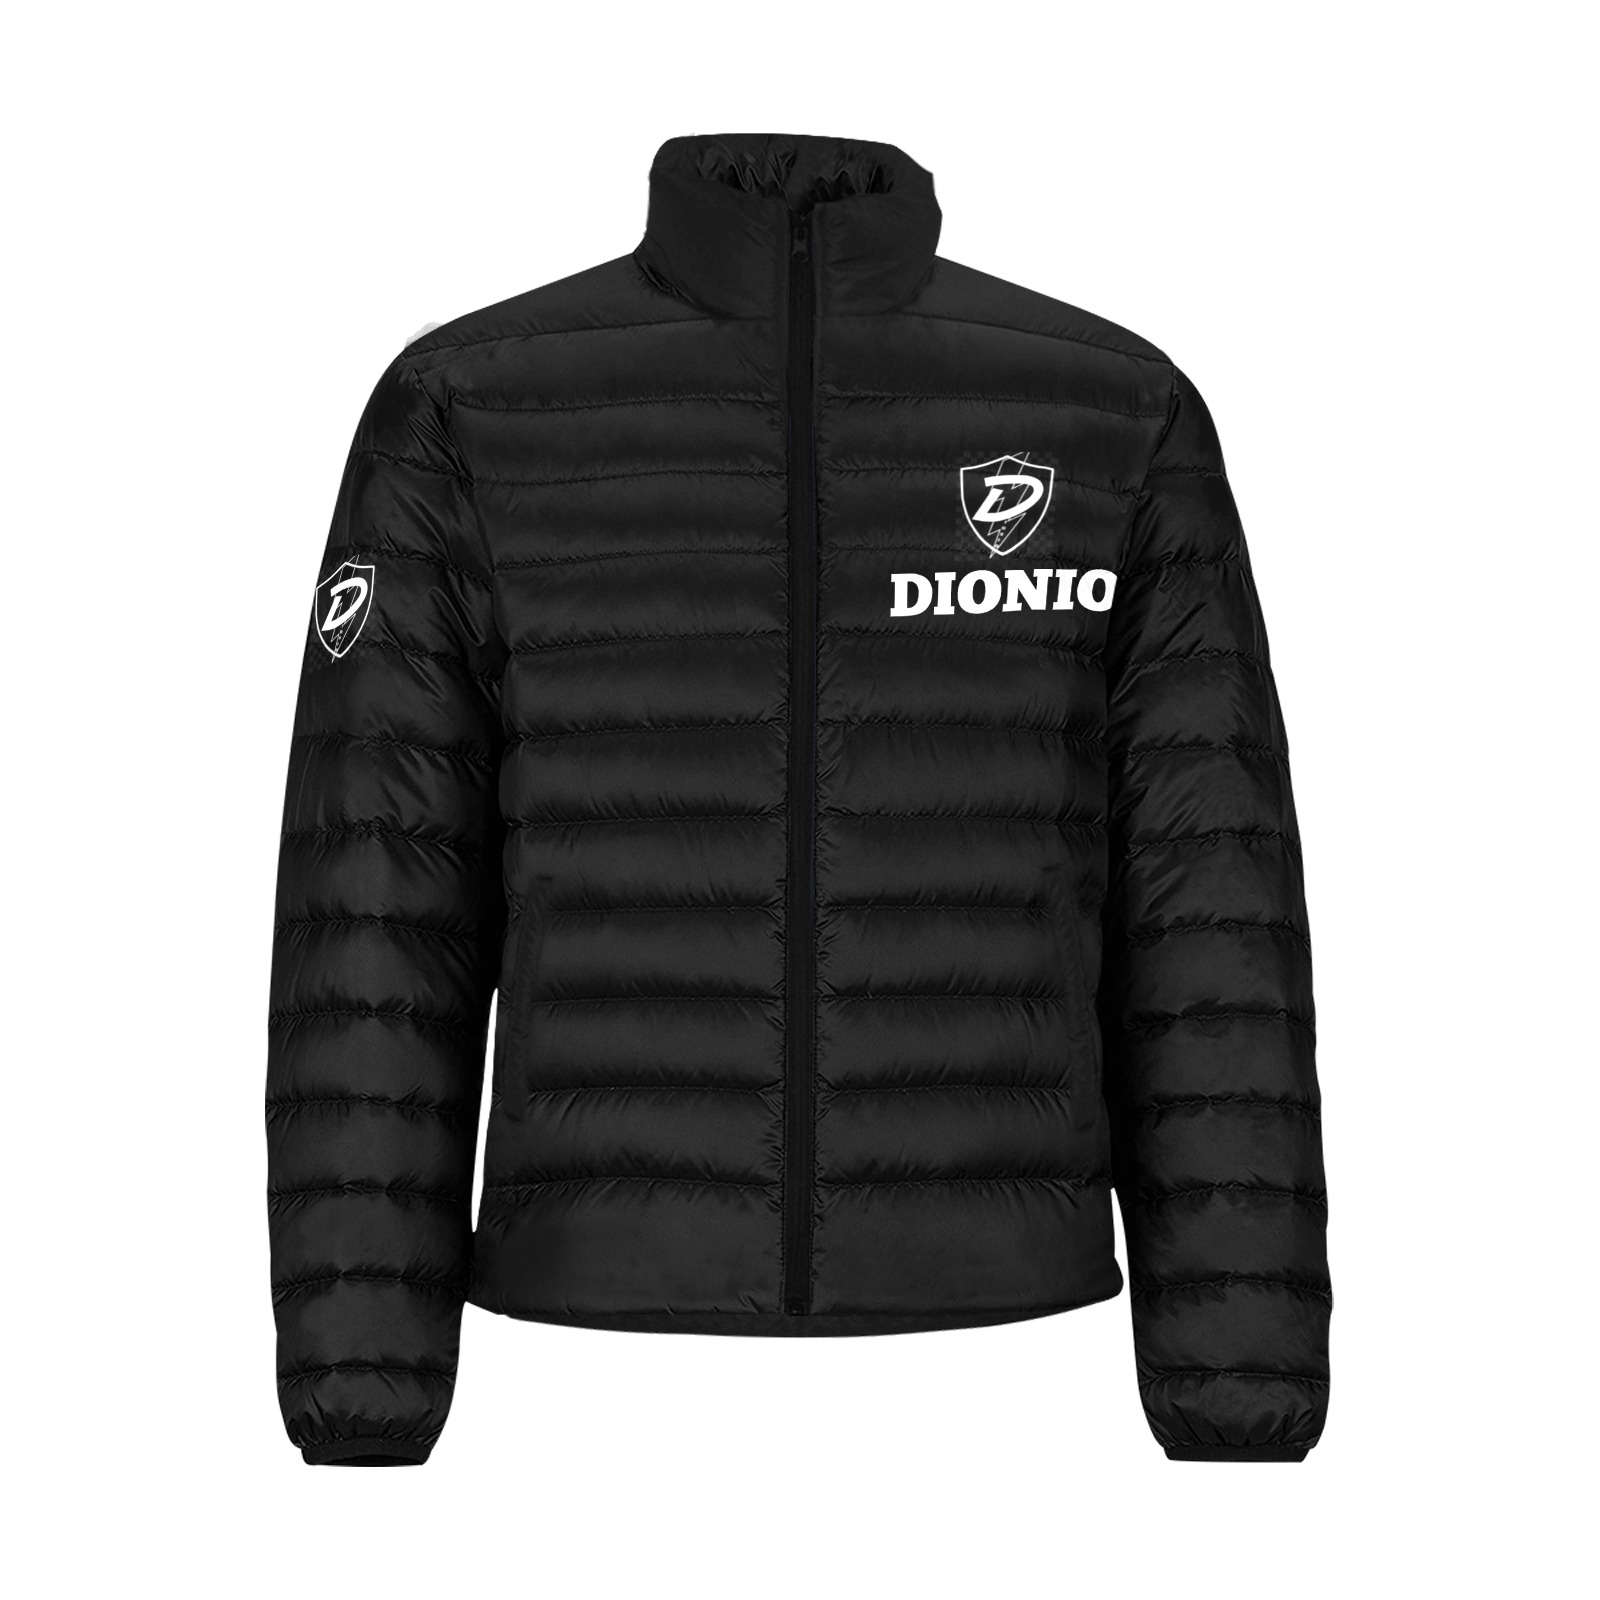 DIONIO - Puffy Coat (Black) Men's Stand Collar Padded Jacket (Model H41)